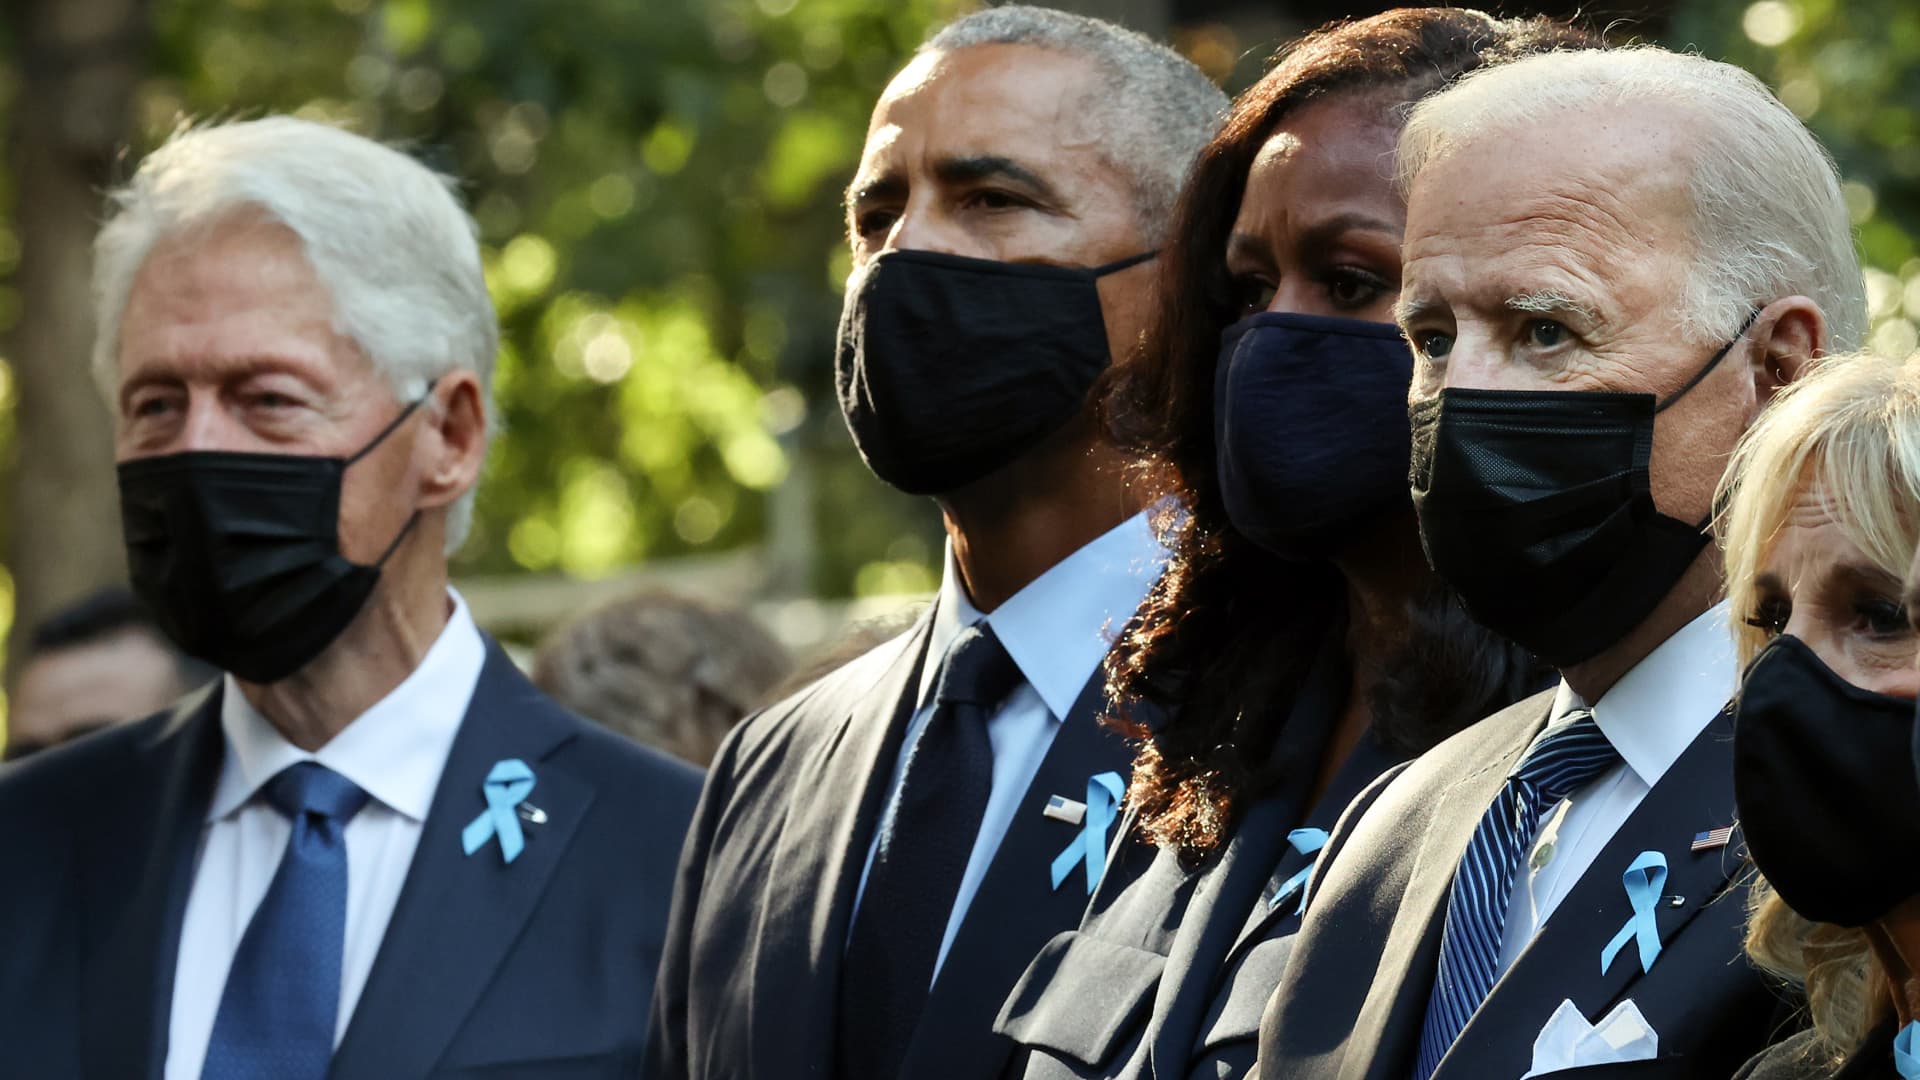 (L-R) Former President Bill Clinton, former President Barack Obama, former First Lady Michelle Obama, President Joe Biden, First Lady Jill Biden and former New York City Mayor Michael Bloomberg attend the annual 9/11 Commemoration Ceremony at the National 9/11 Memorial and Museum on September 11, 2021 in New York City.